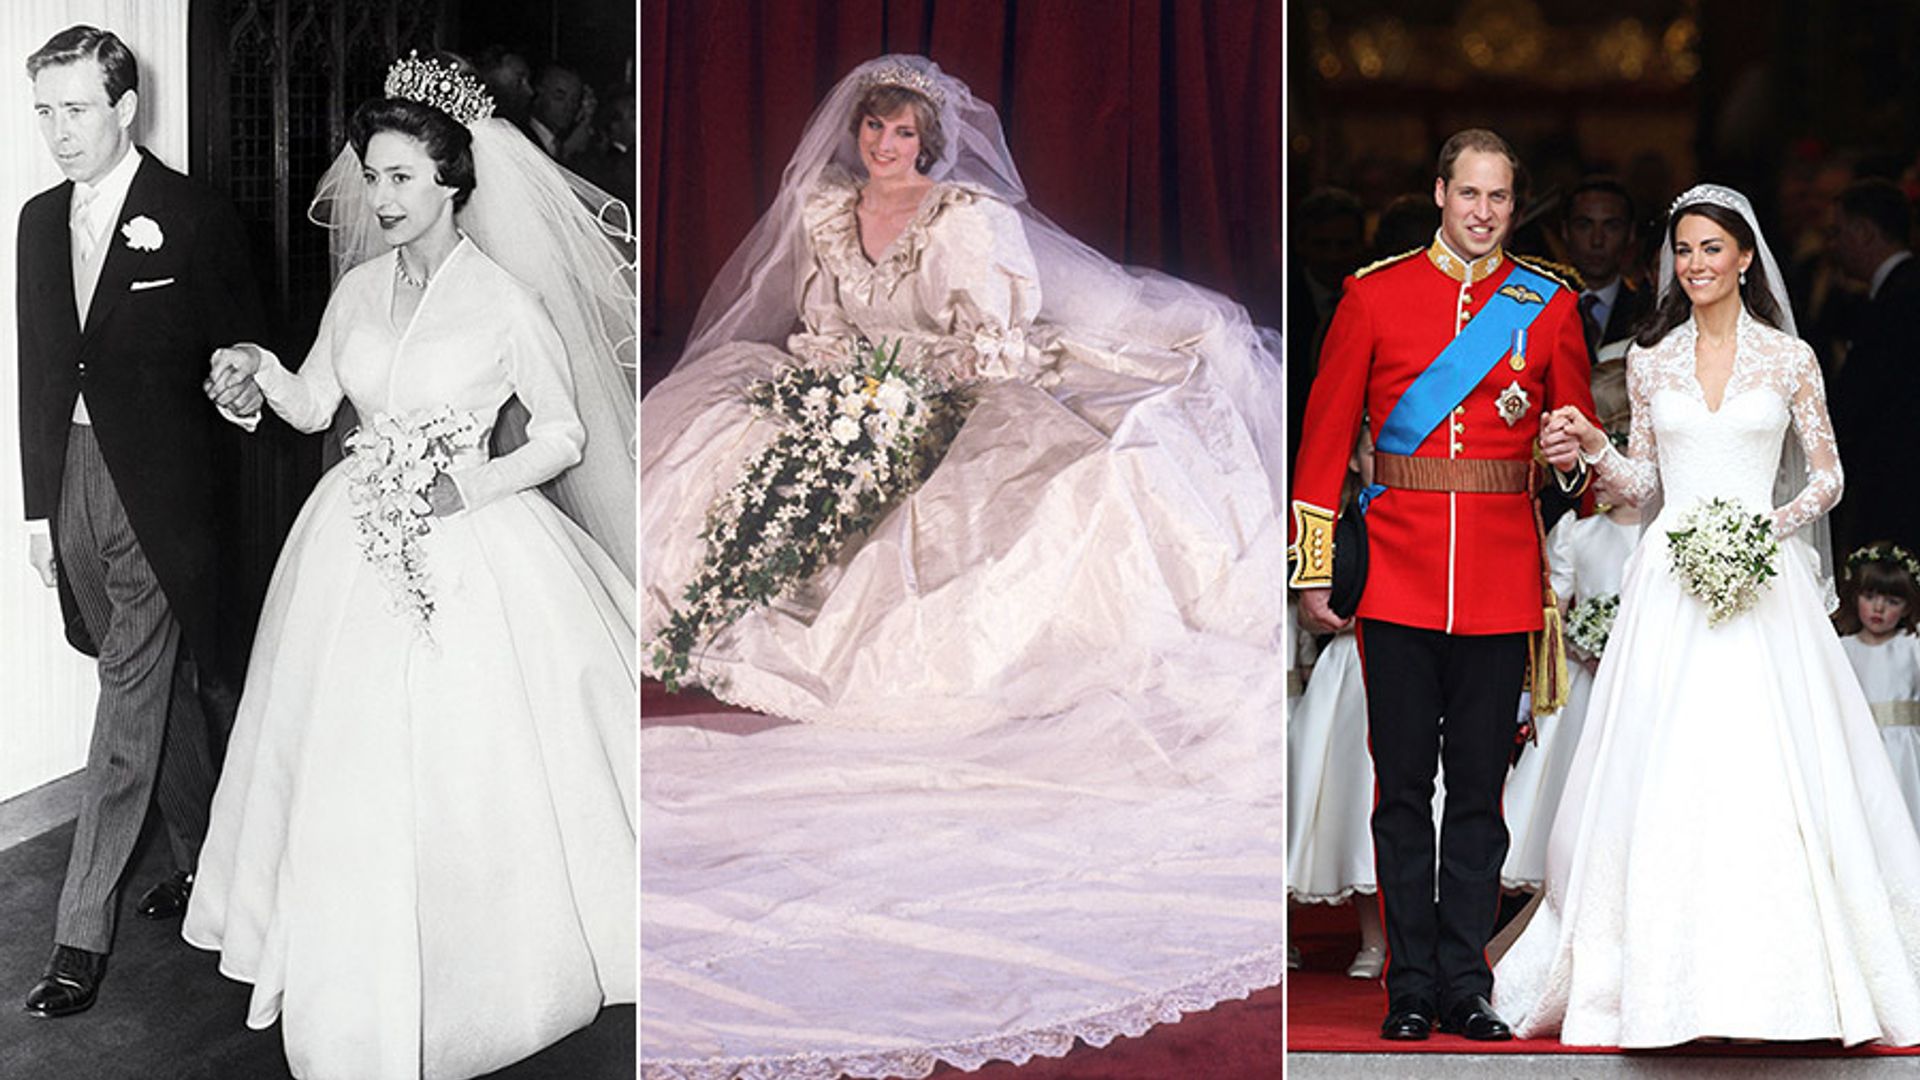 The special details you may have missed from these royal brides' wedding day looks